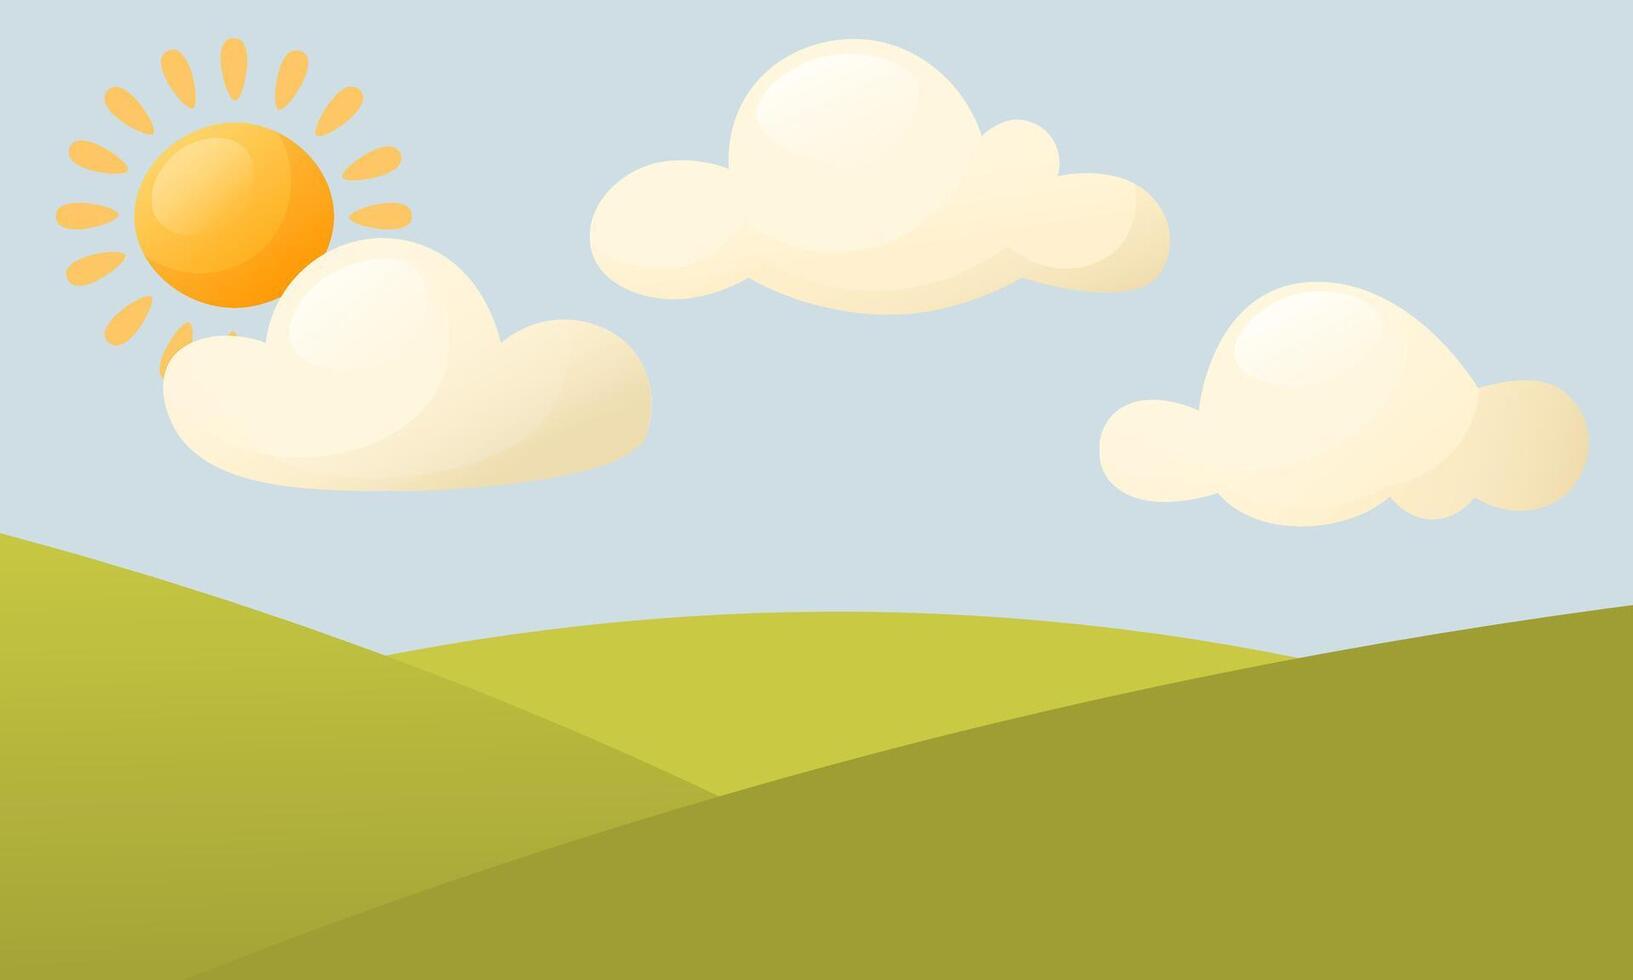 Vector illustration of a beautiful summer landscape. Green field of grass, blue sky with clouds, bright sun. Day, morning. Landscape design for banners, posters, children's books.